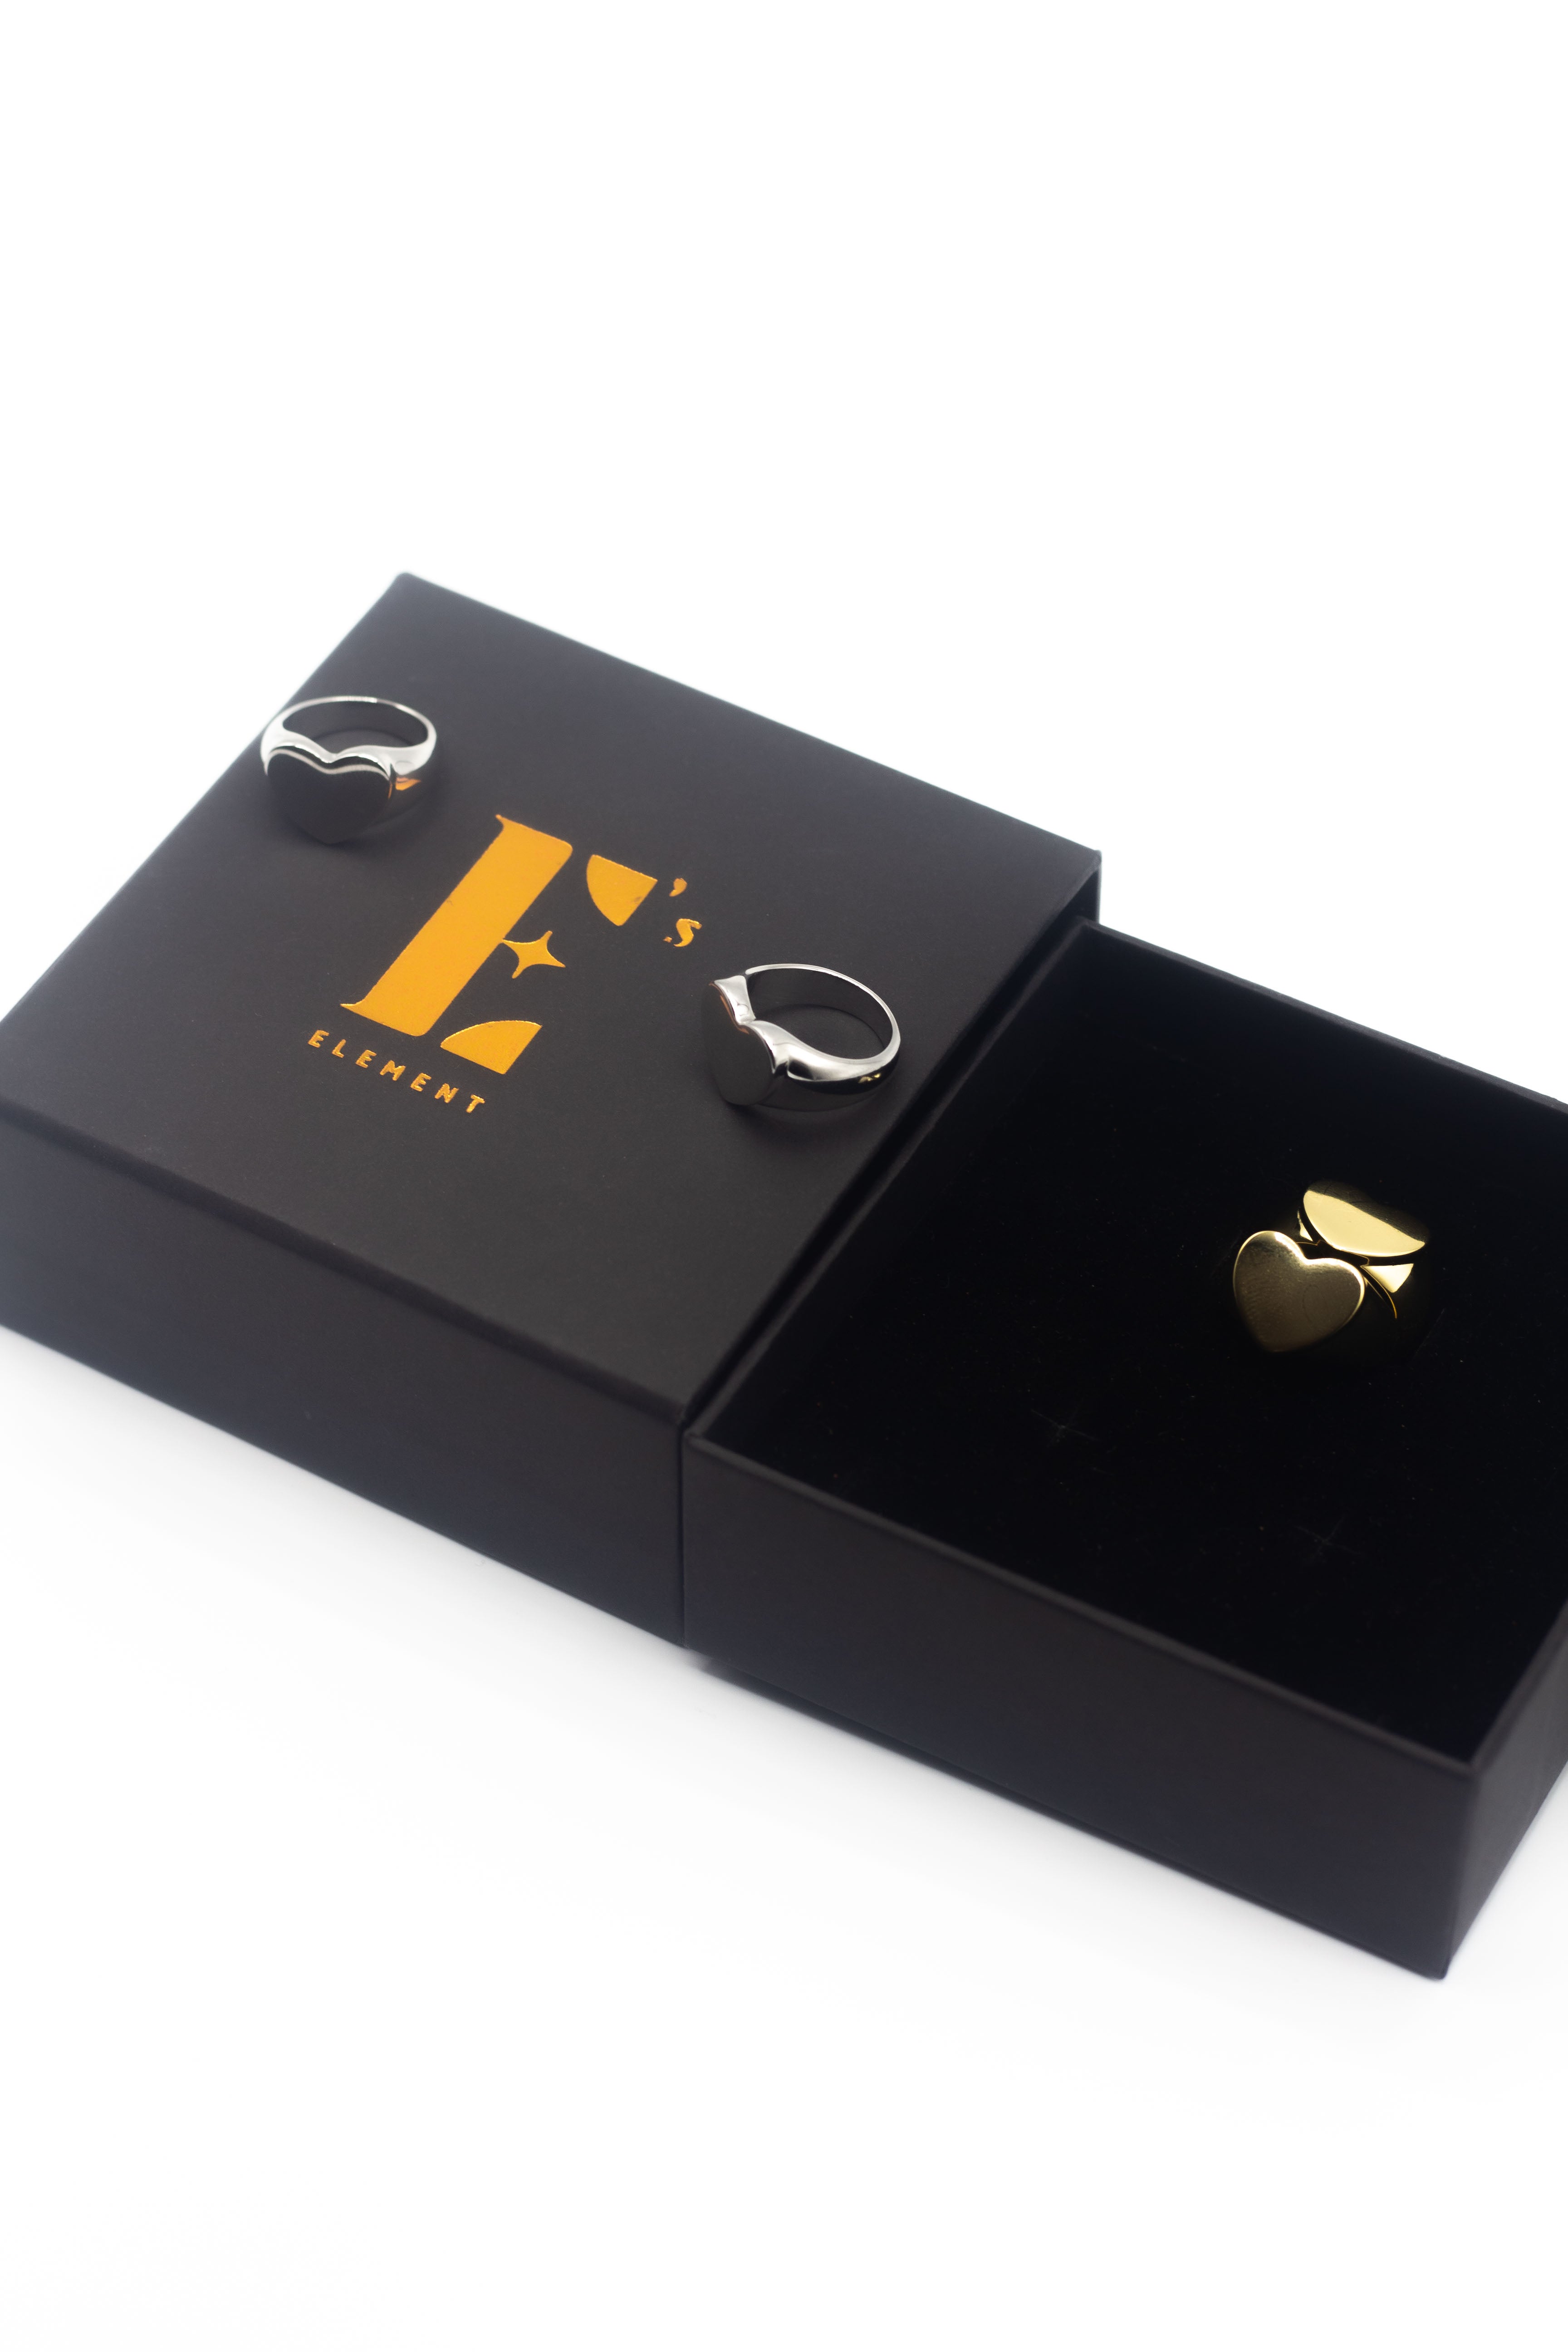 On the left there is a black box with the E's Element logo imprinted in yellow. Resting on top of the box are two 18k silver rings with heart signets. On the right is an opened box with an 18k gold ring with a heart shaped signet. Ellina Heart Signet Ring by E's Element.